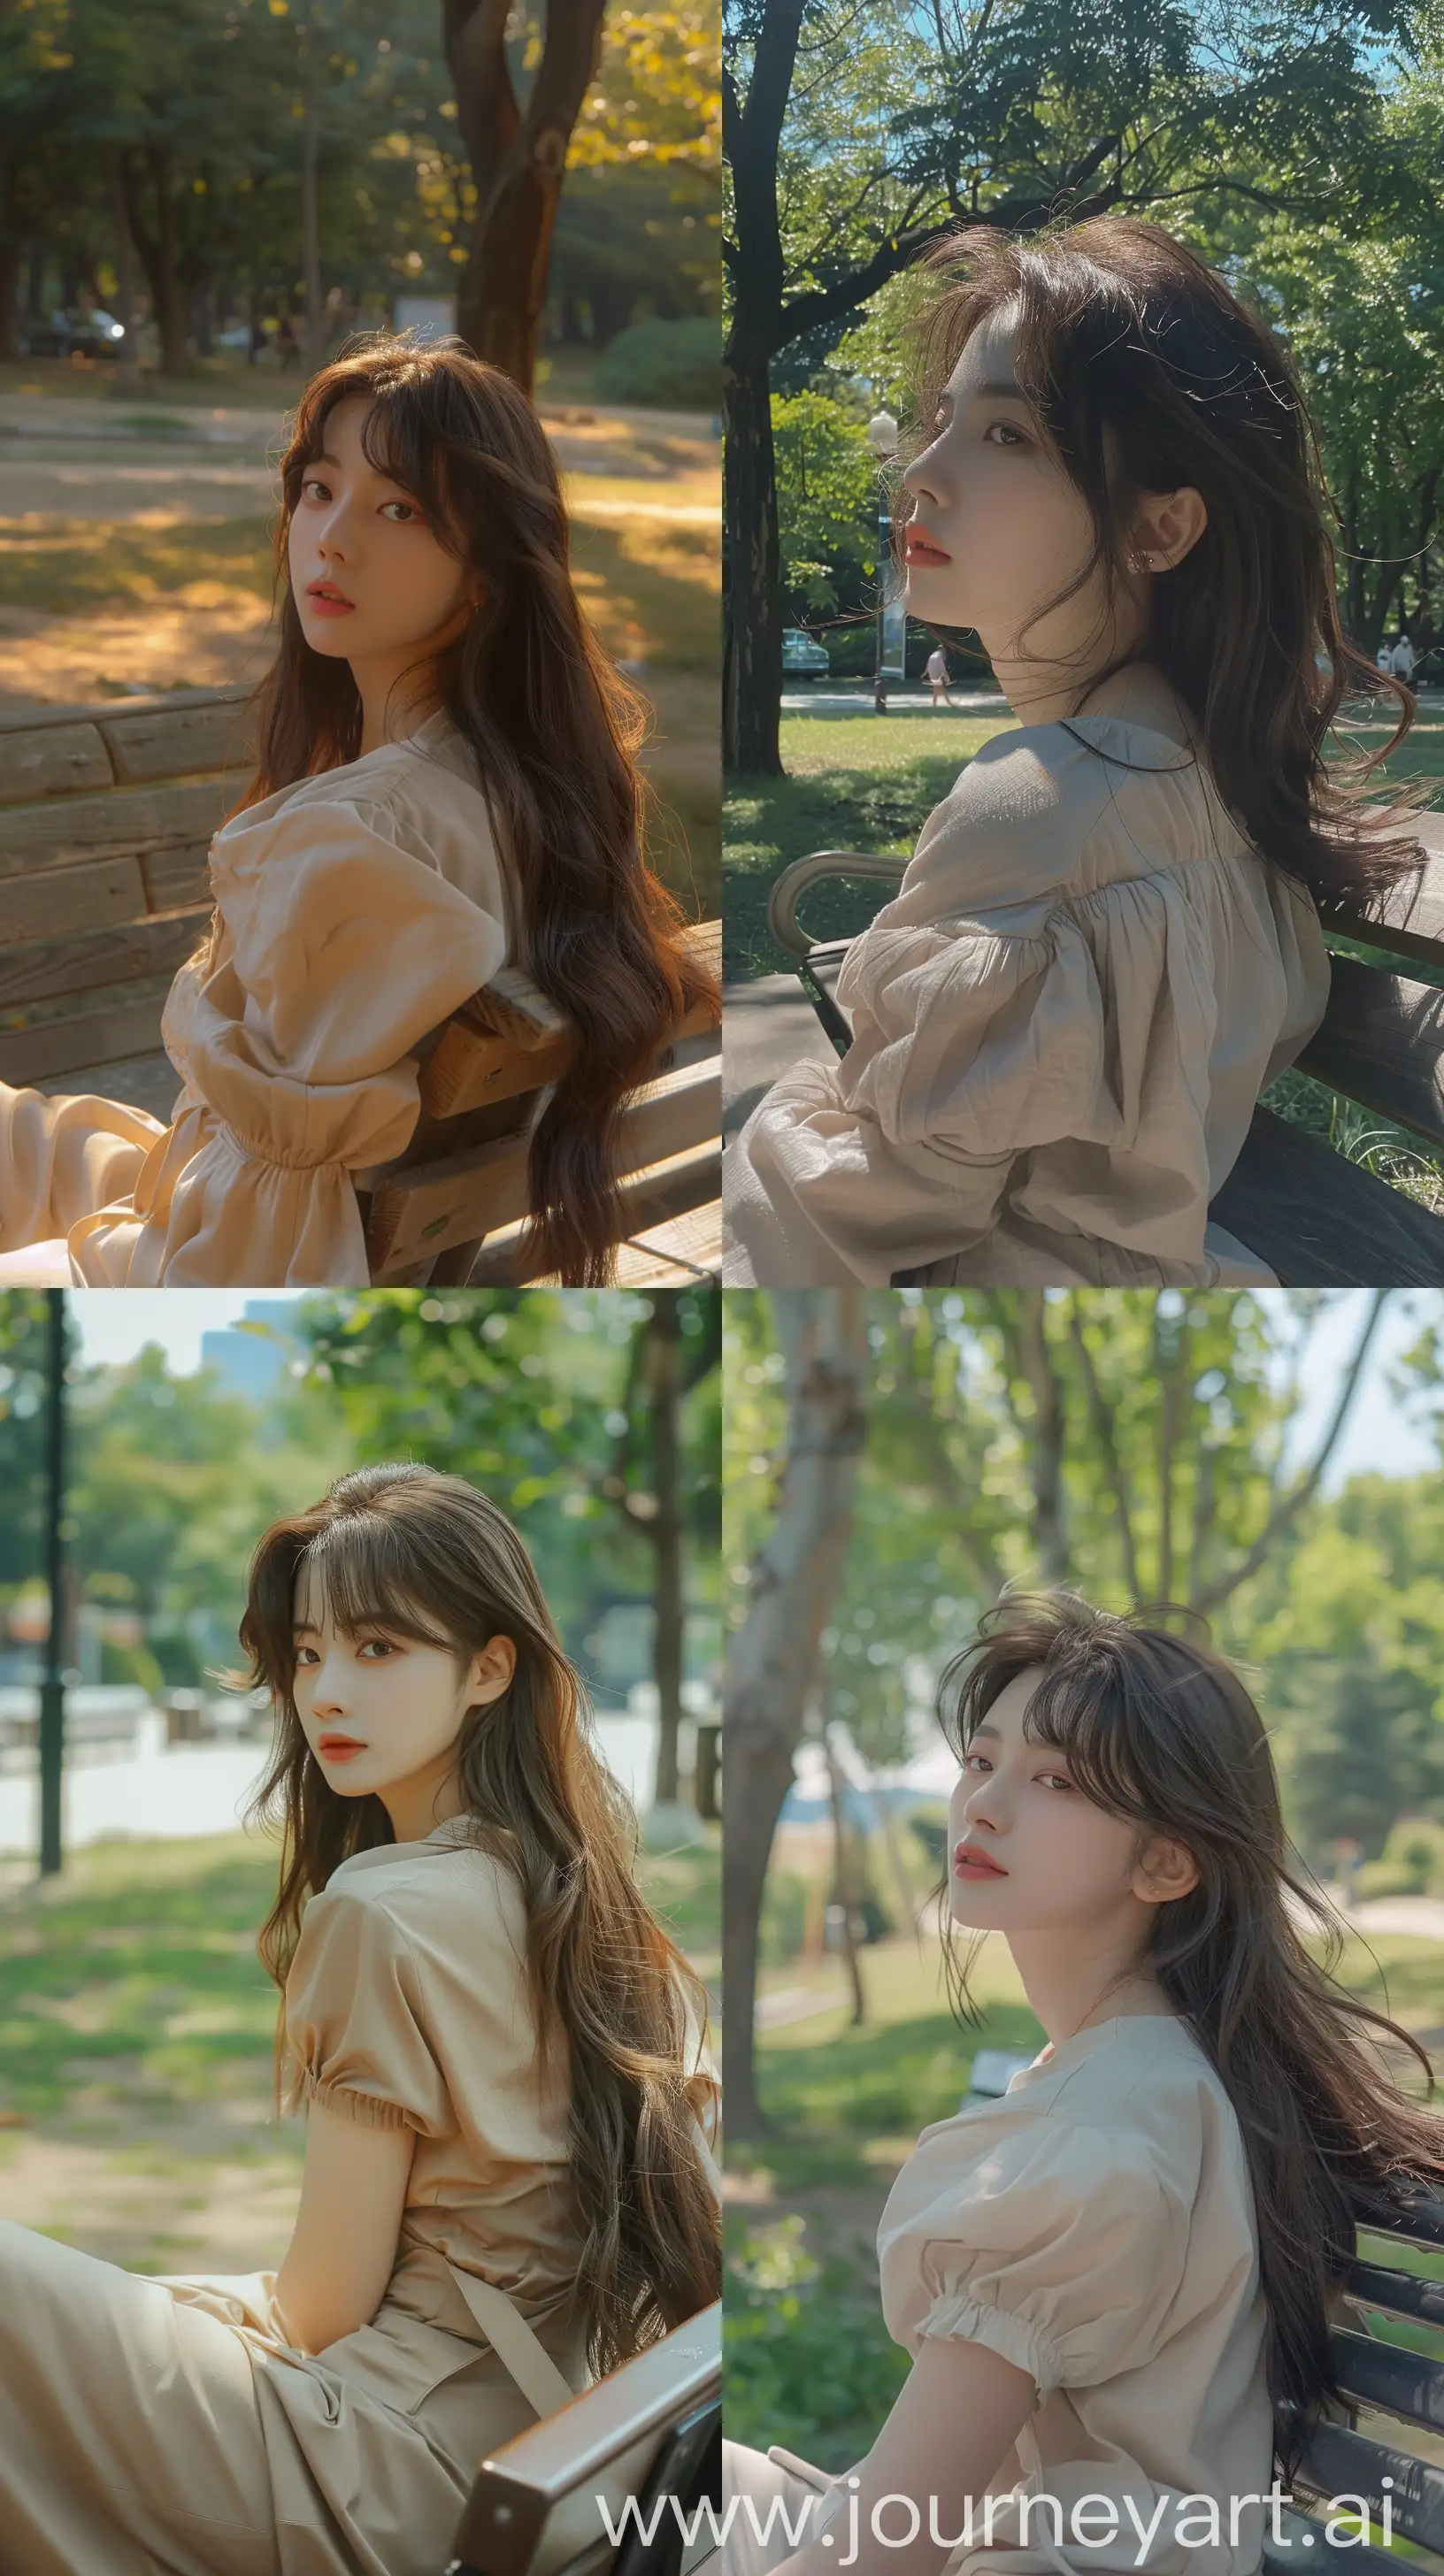 Adorable-Park-Bench-Aesthetic-Selfie-with-Wonyoung-in-Cute-Attire